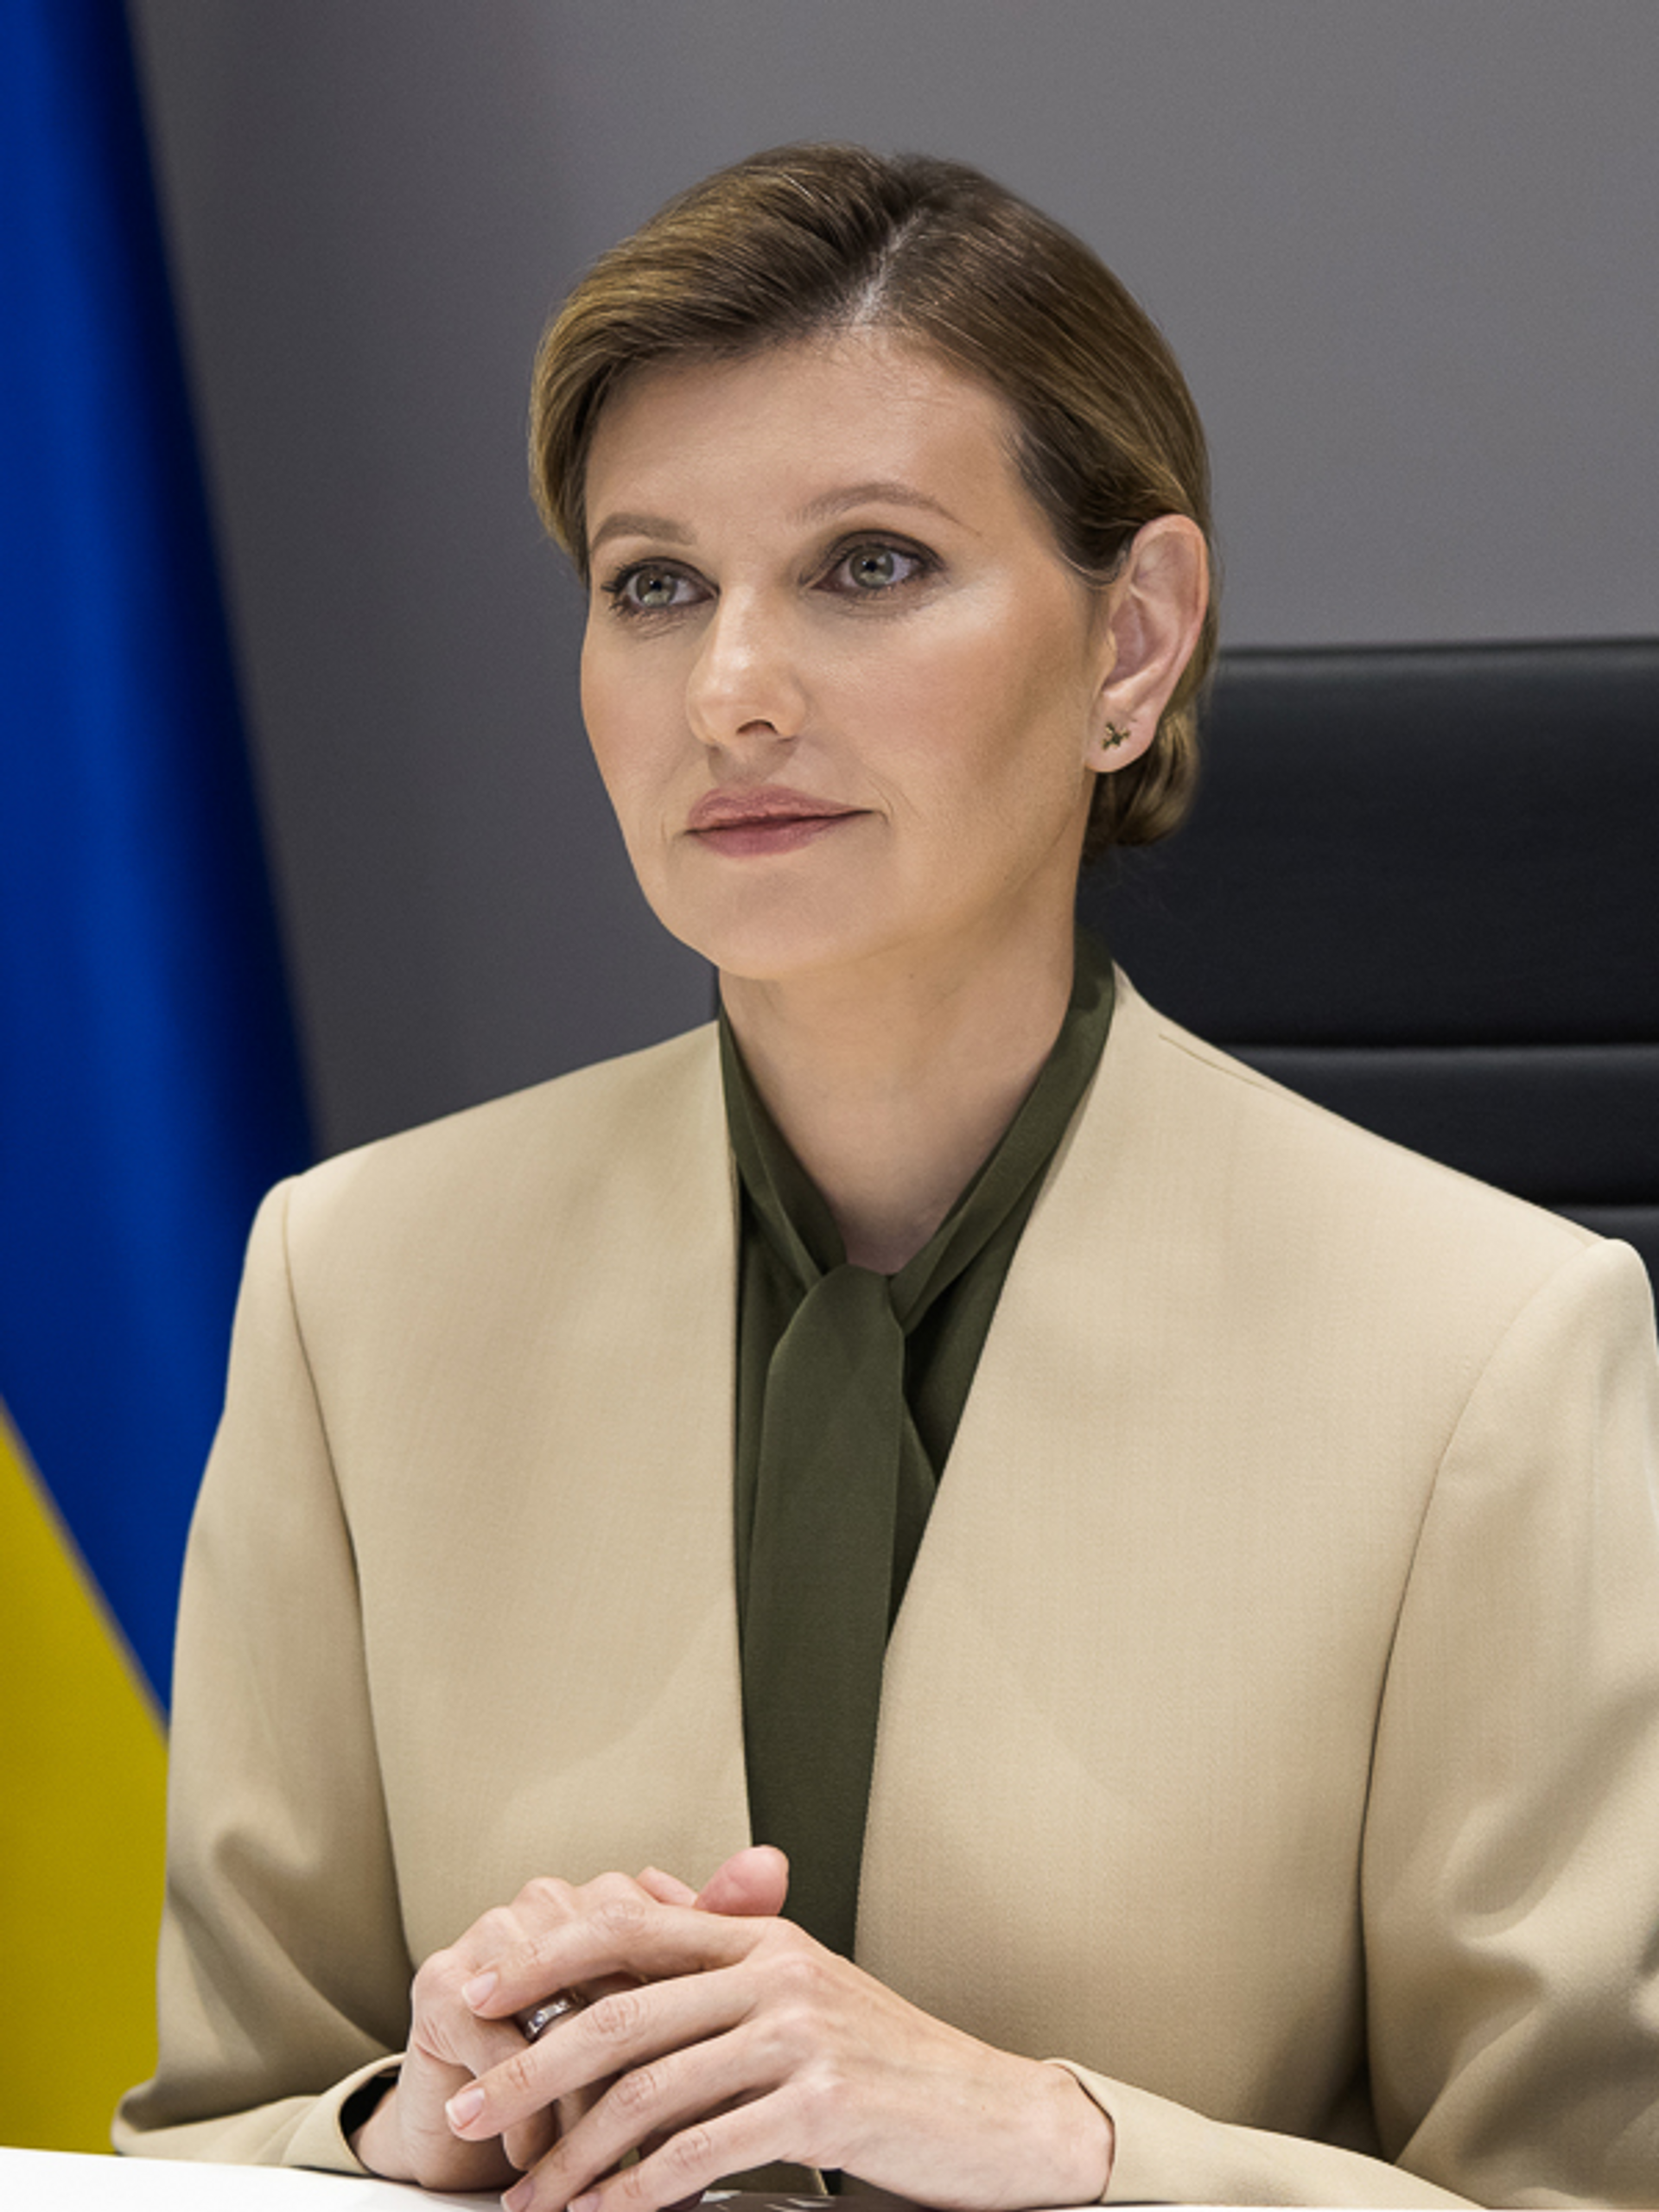 Elena Zelenska, wife of president Volodymyr Zelensky , pictured prior to the 2022 Russian invasion of Ukraine. She will support the partnership between the British Council and the Ukrainian Institute. 